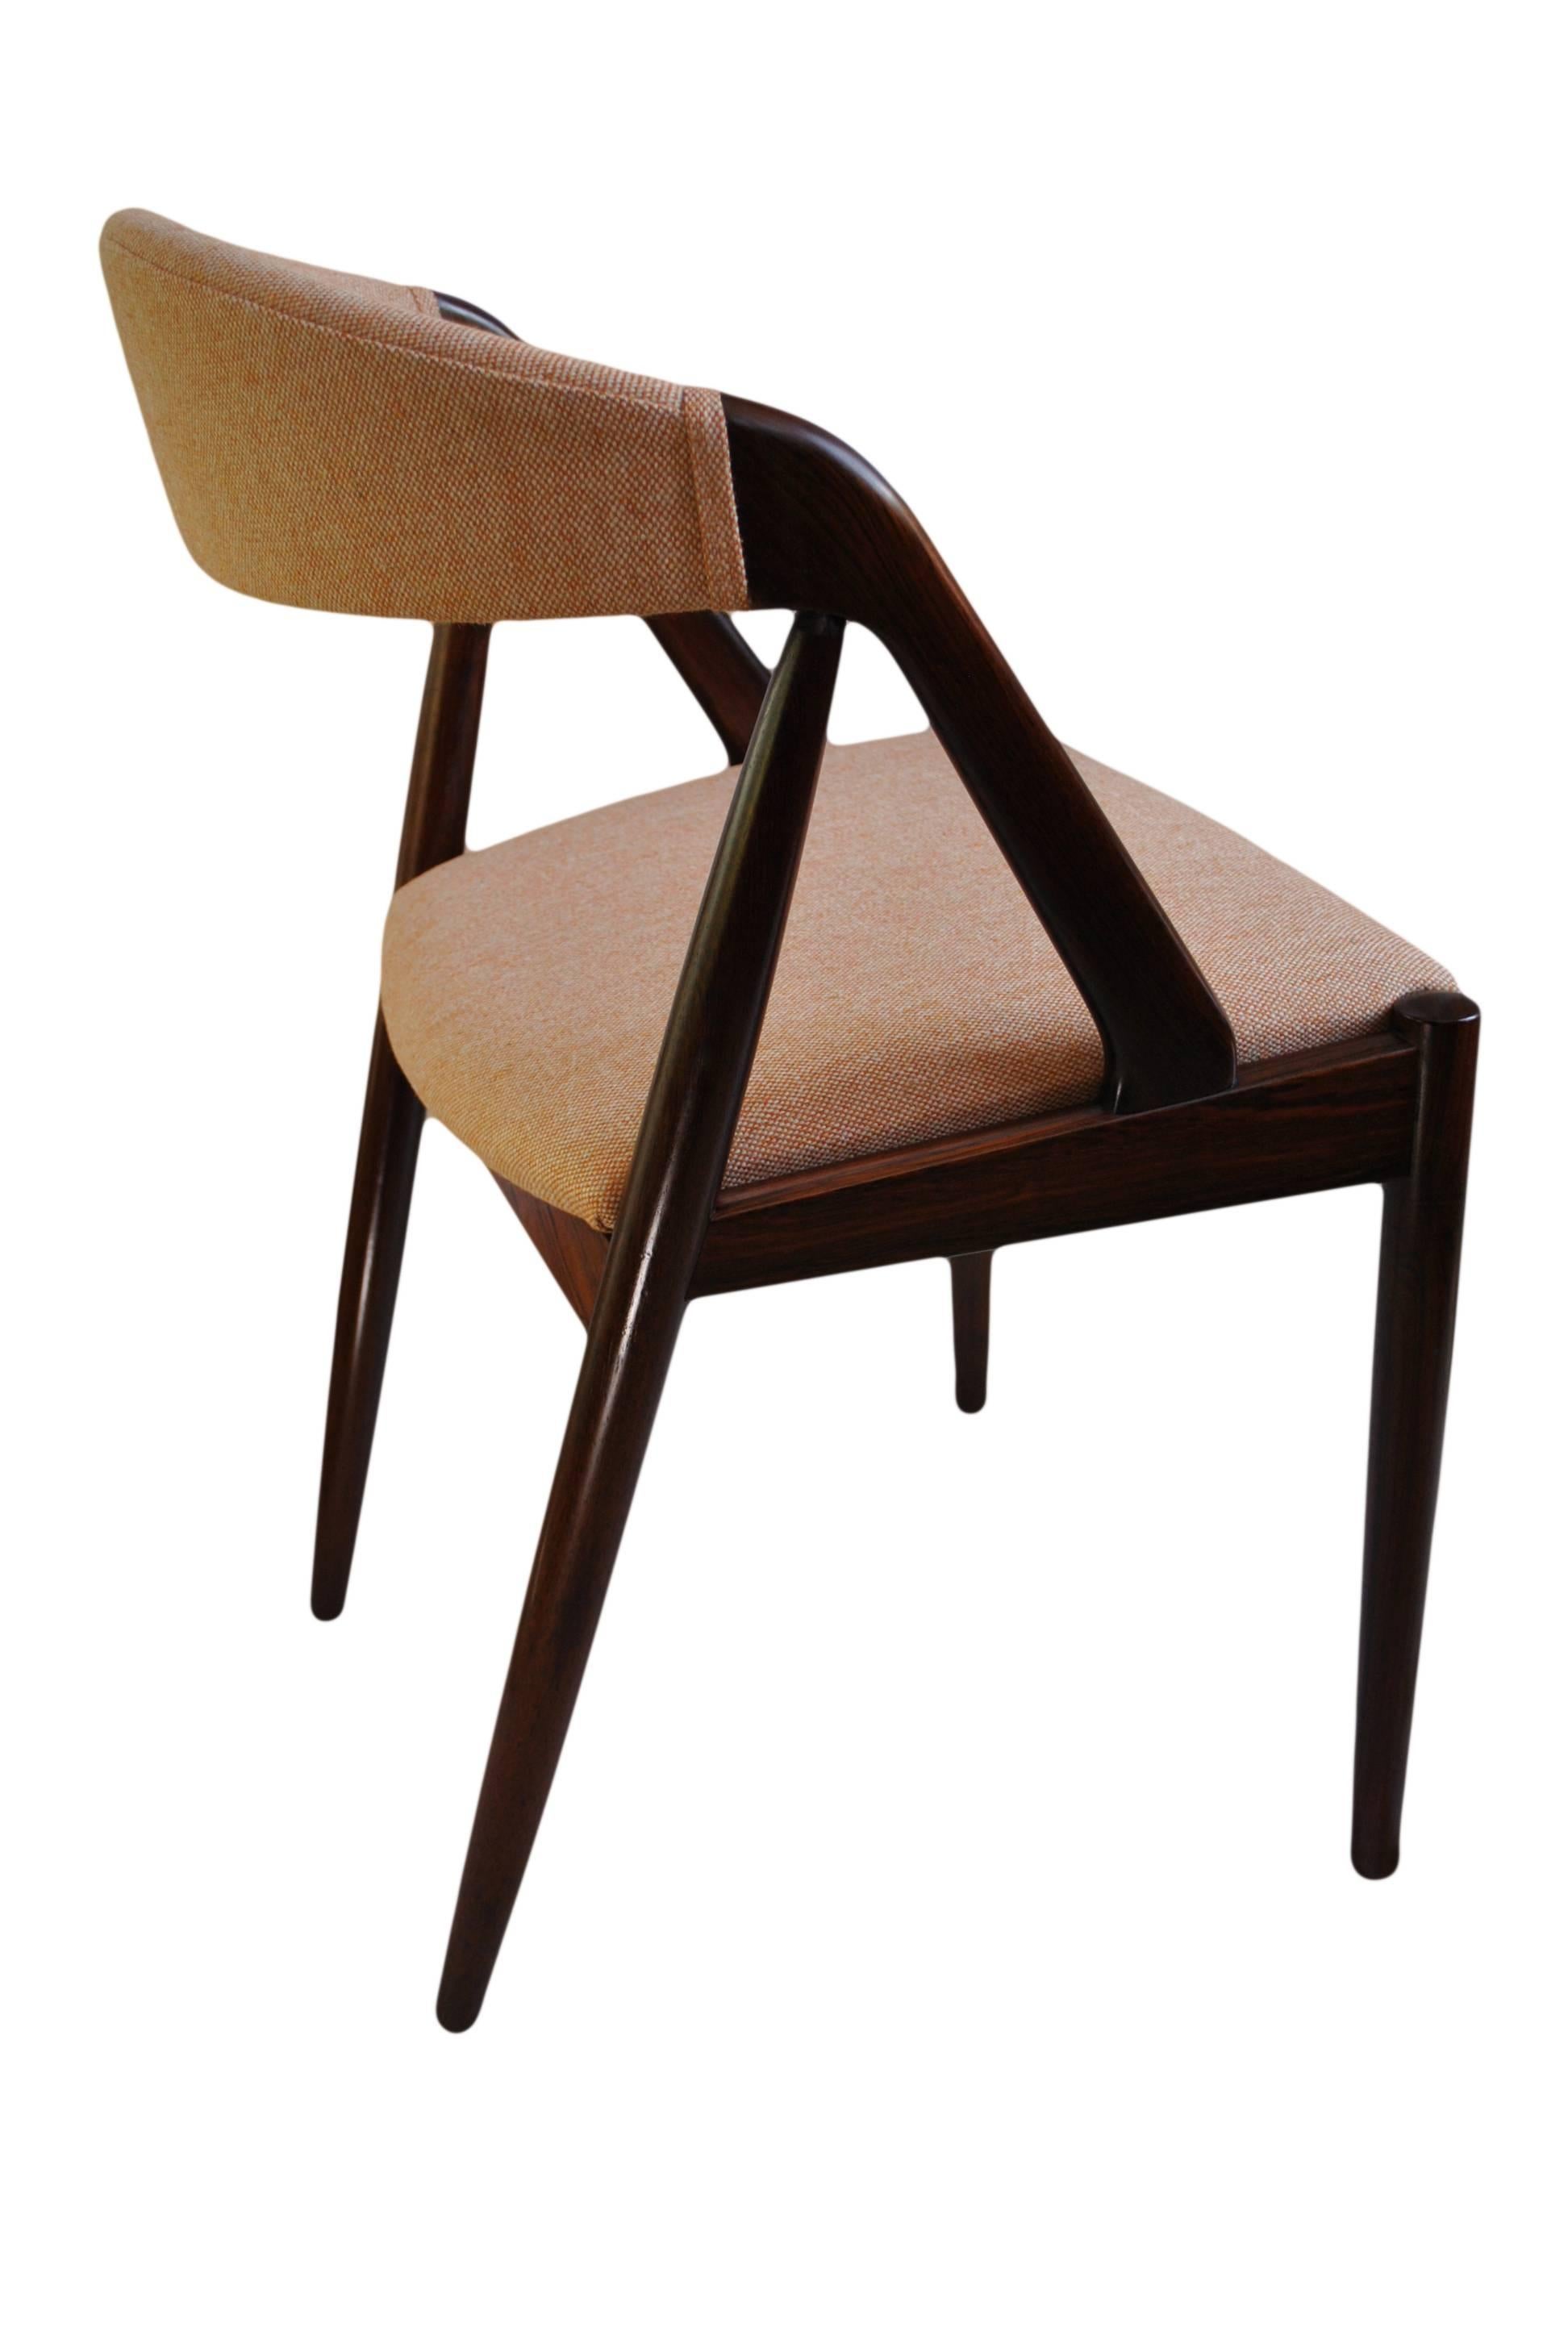 Kai Kristiansen Dining Chairs, Refurbished and reupholstered. 1